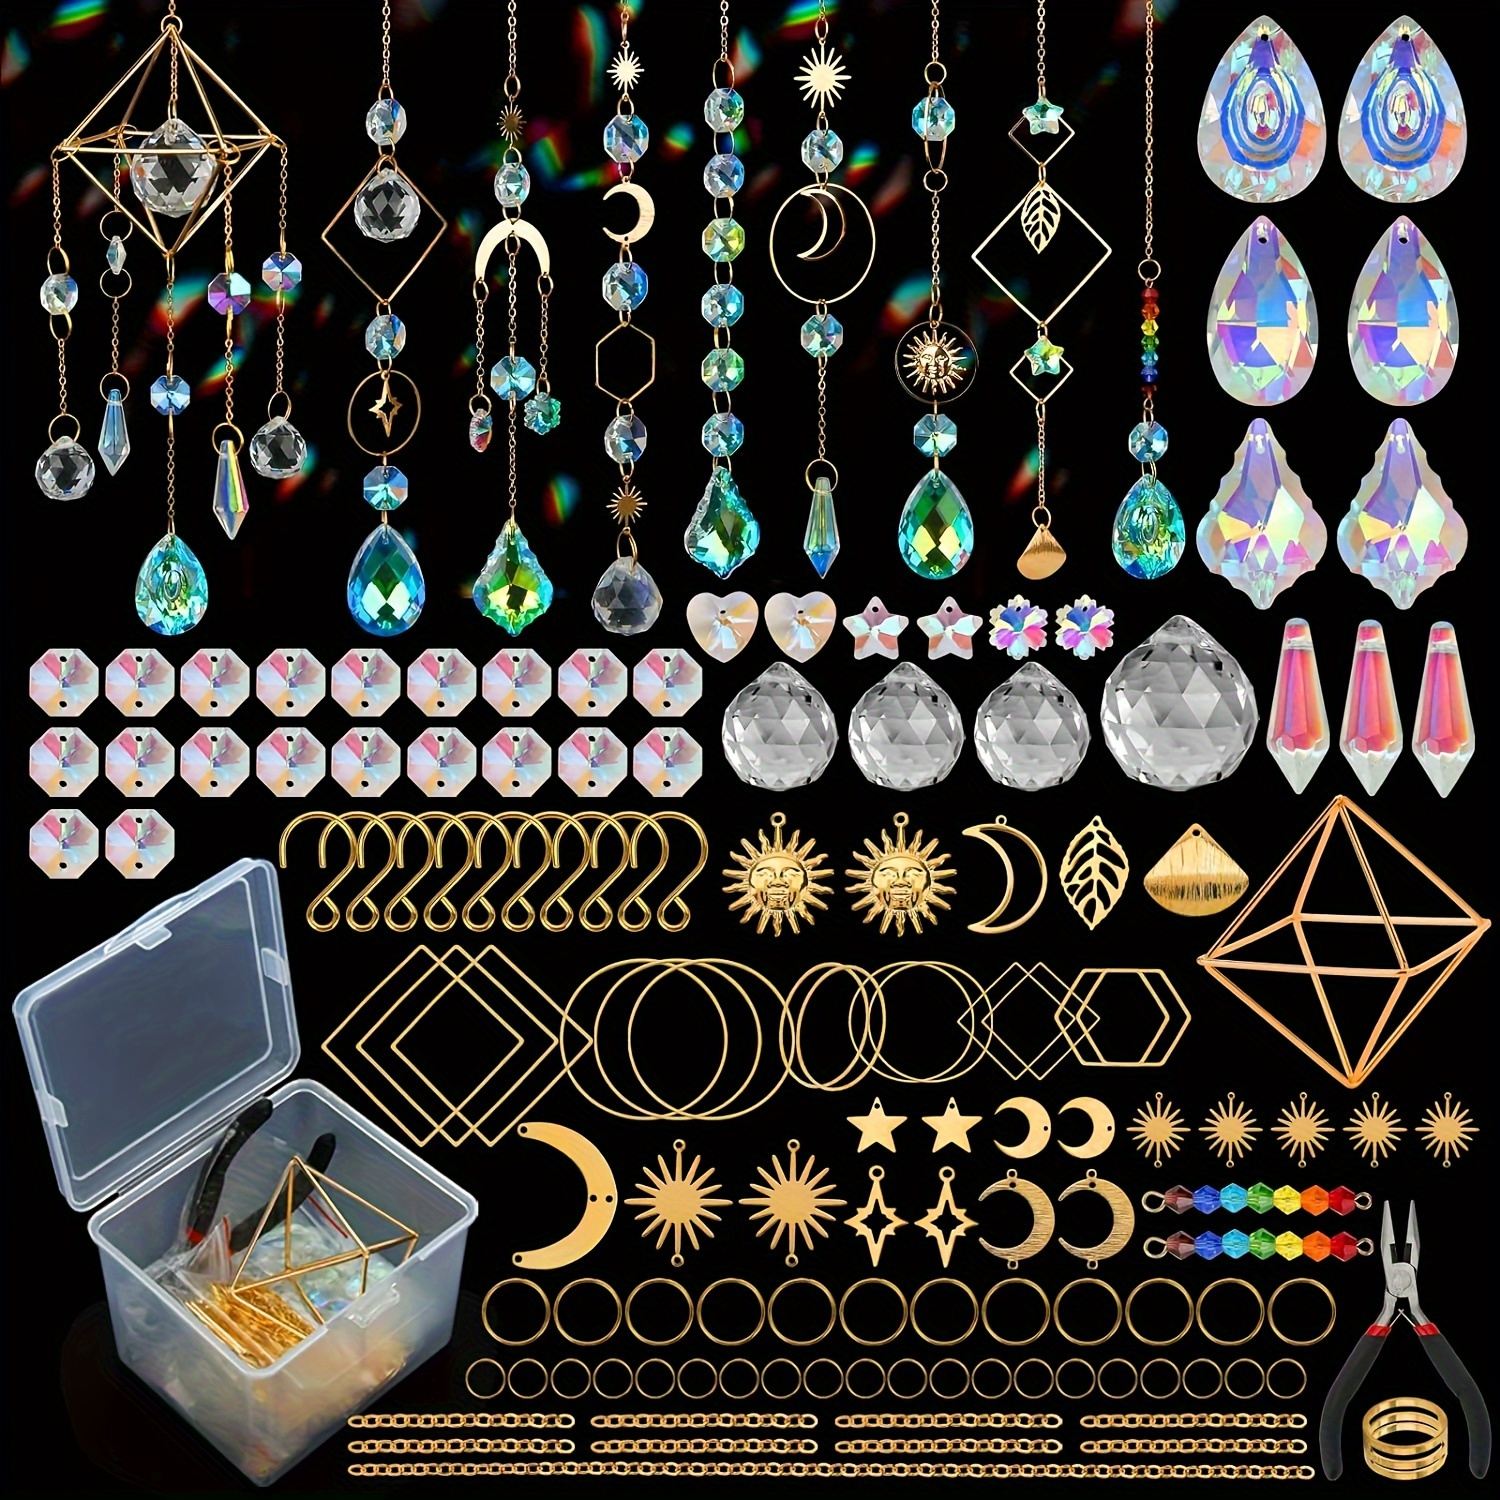 

400-piece Diy Suncatcher Kit With Prisms - Crystal Rainbow Makers For Indoor Windows & Office, Glass Craft Supplies Set With Tools, Perfect For Christmas & Music-themed Decorations